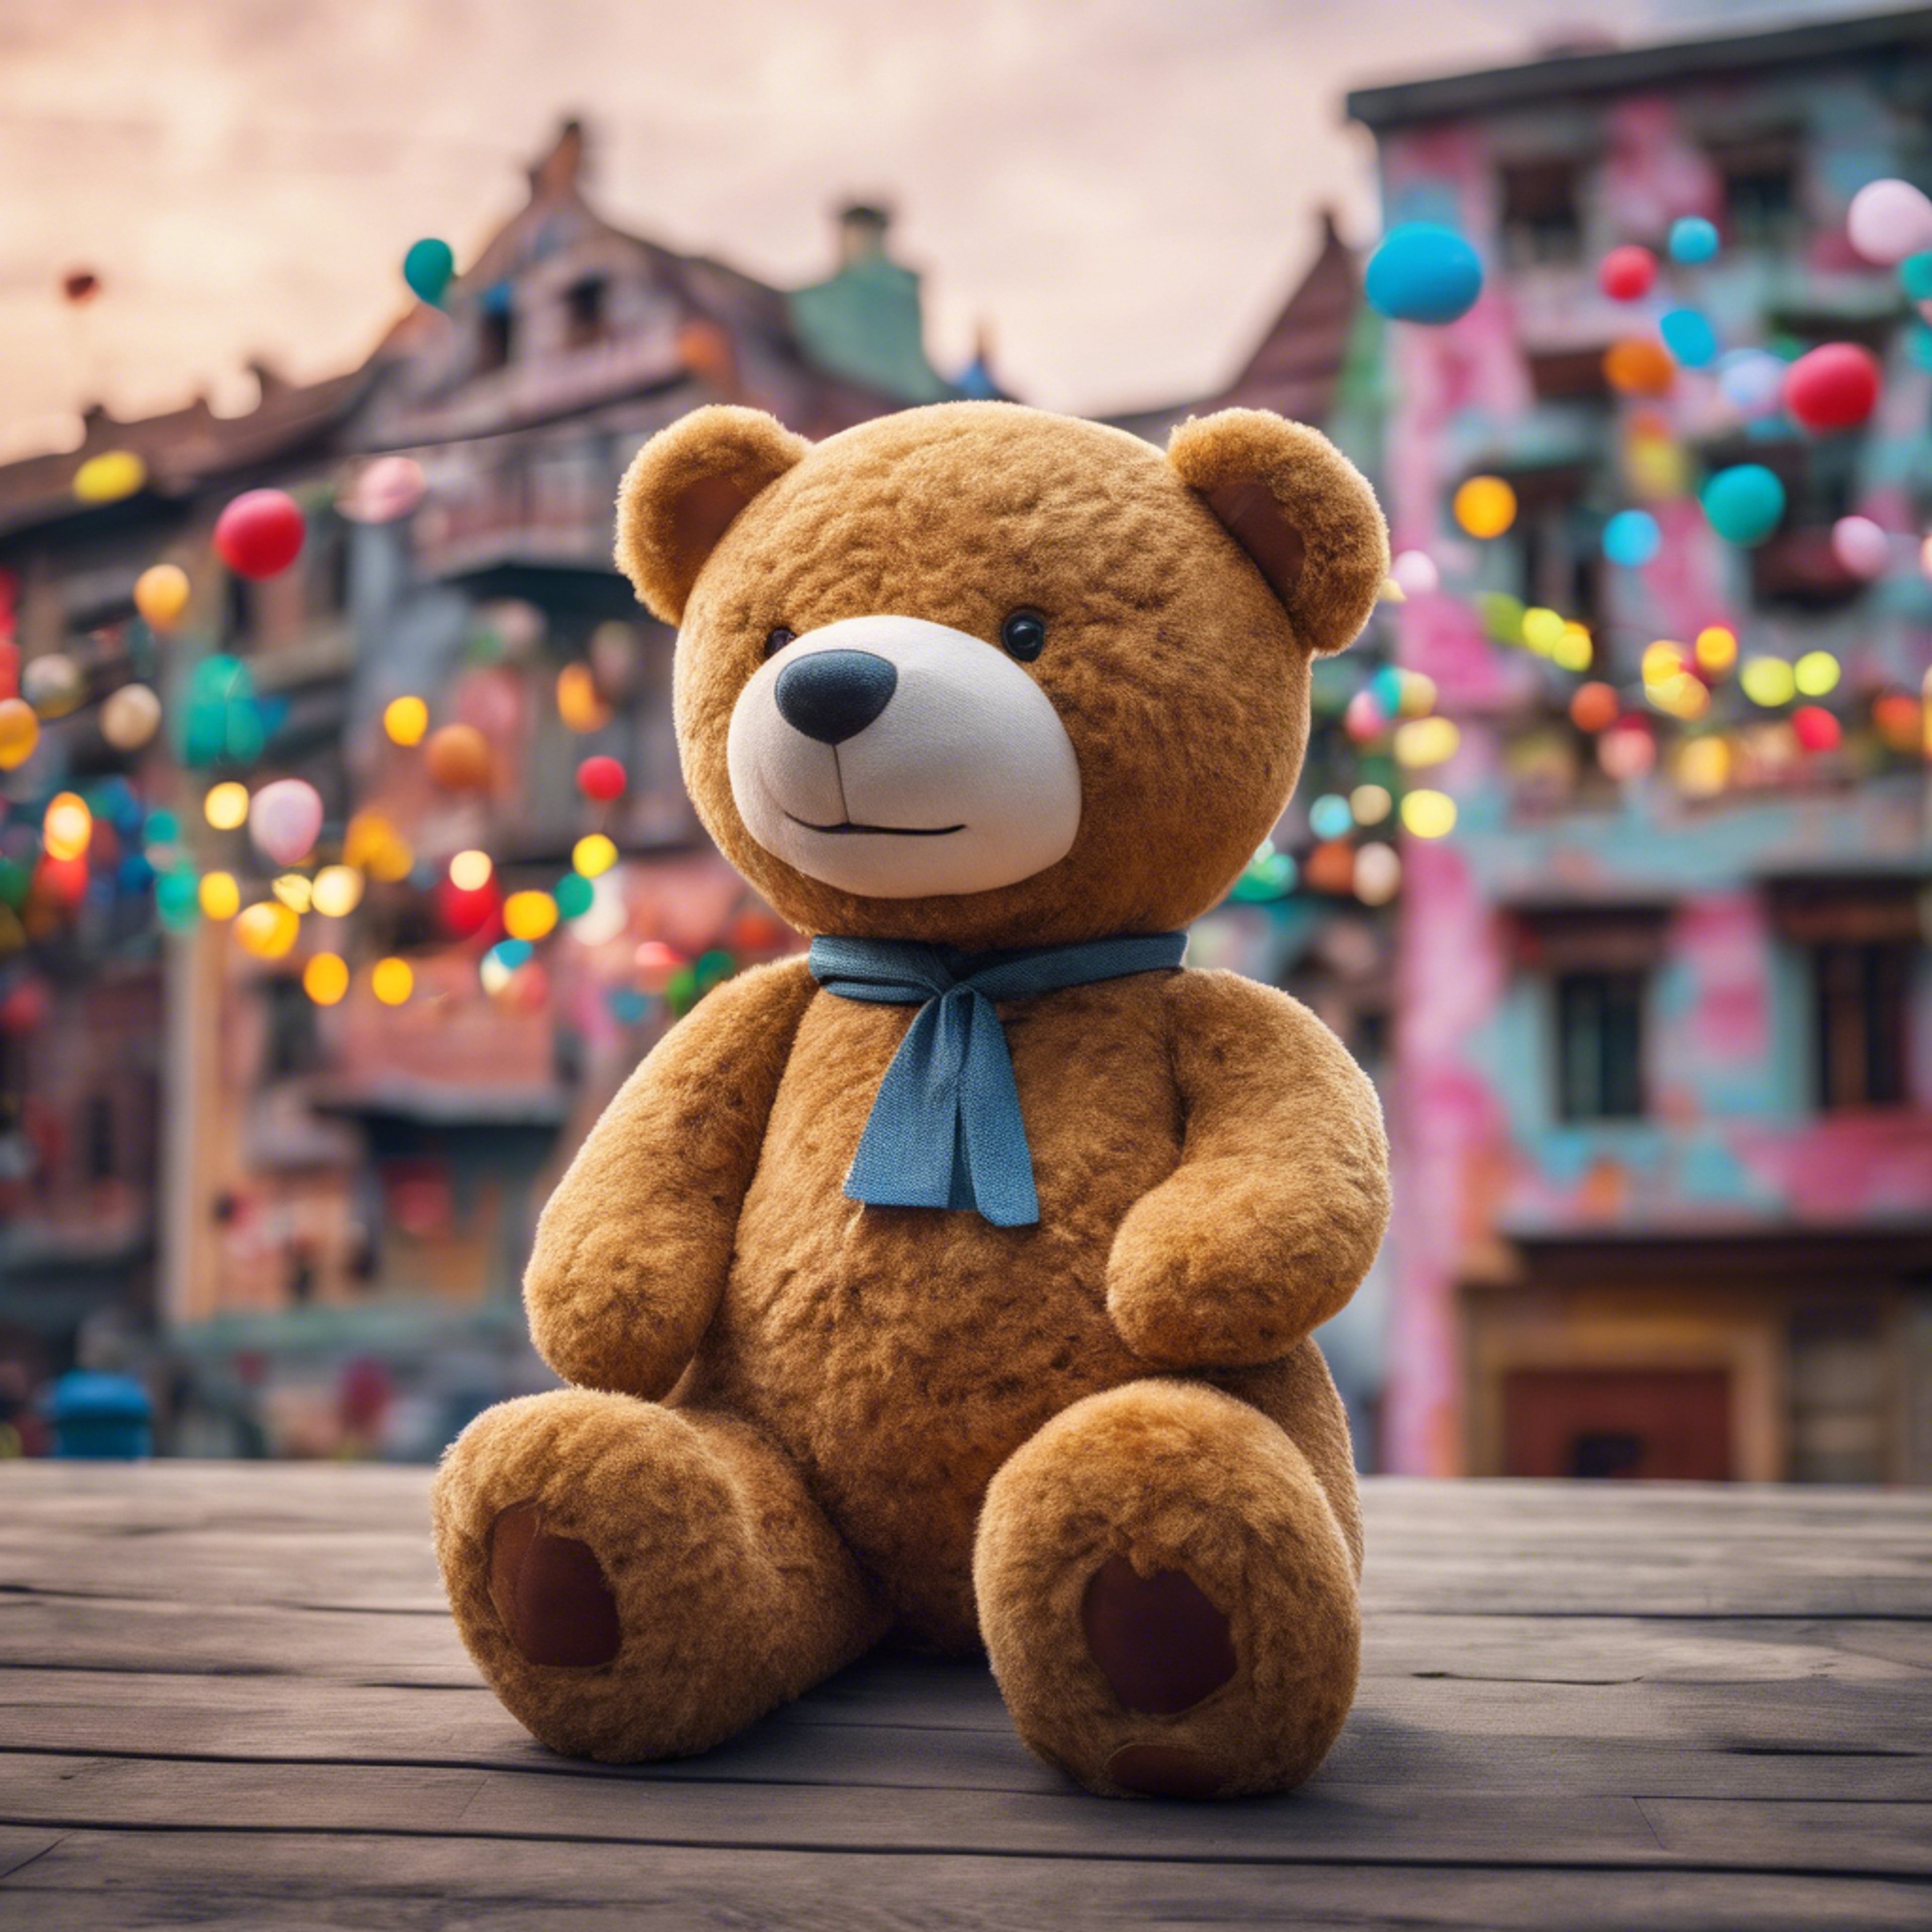 A giant teddy bear watching over a playful and colorful dream town. 牆紙[2720b550e885450daa82]